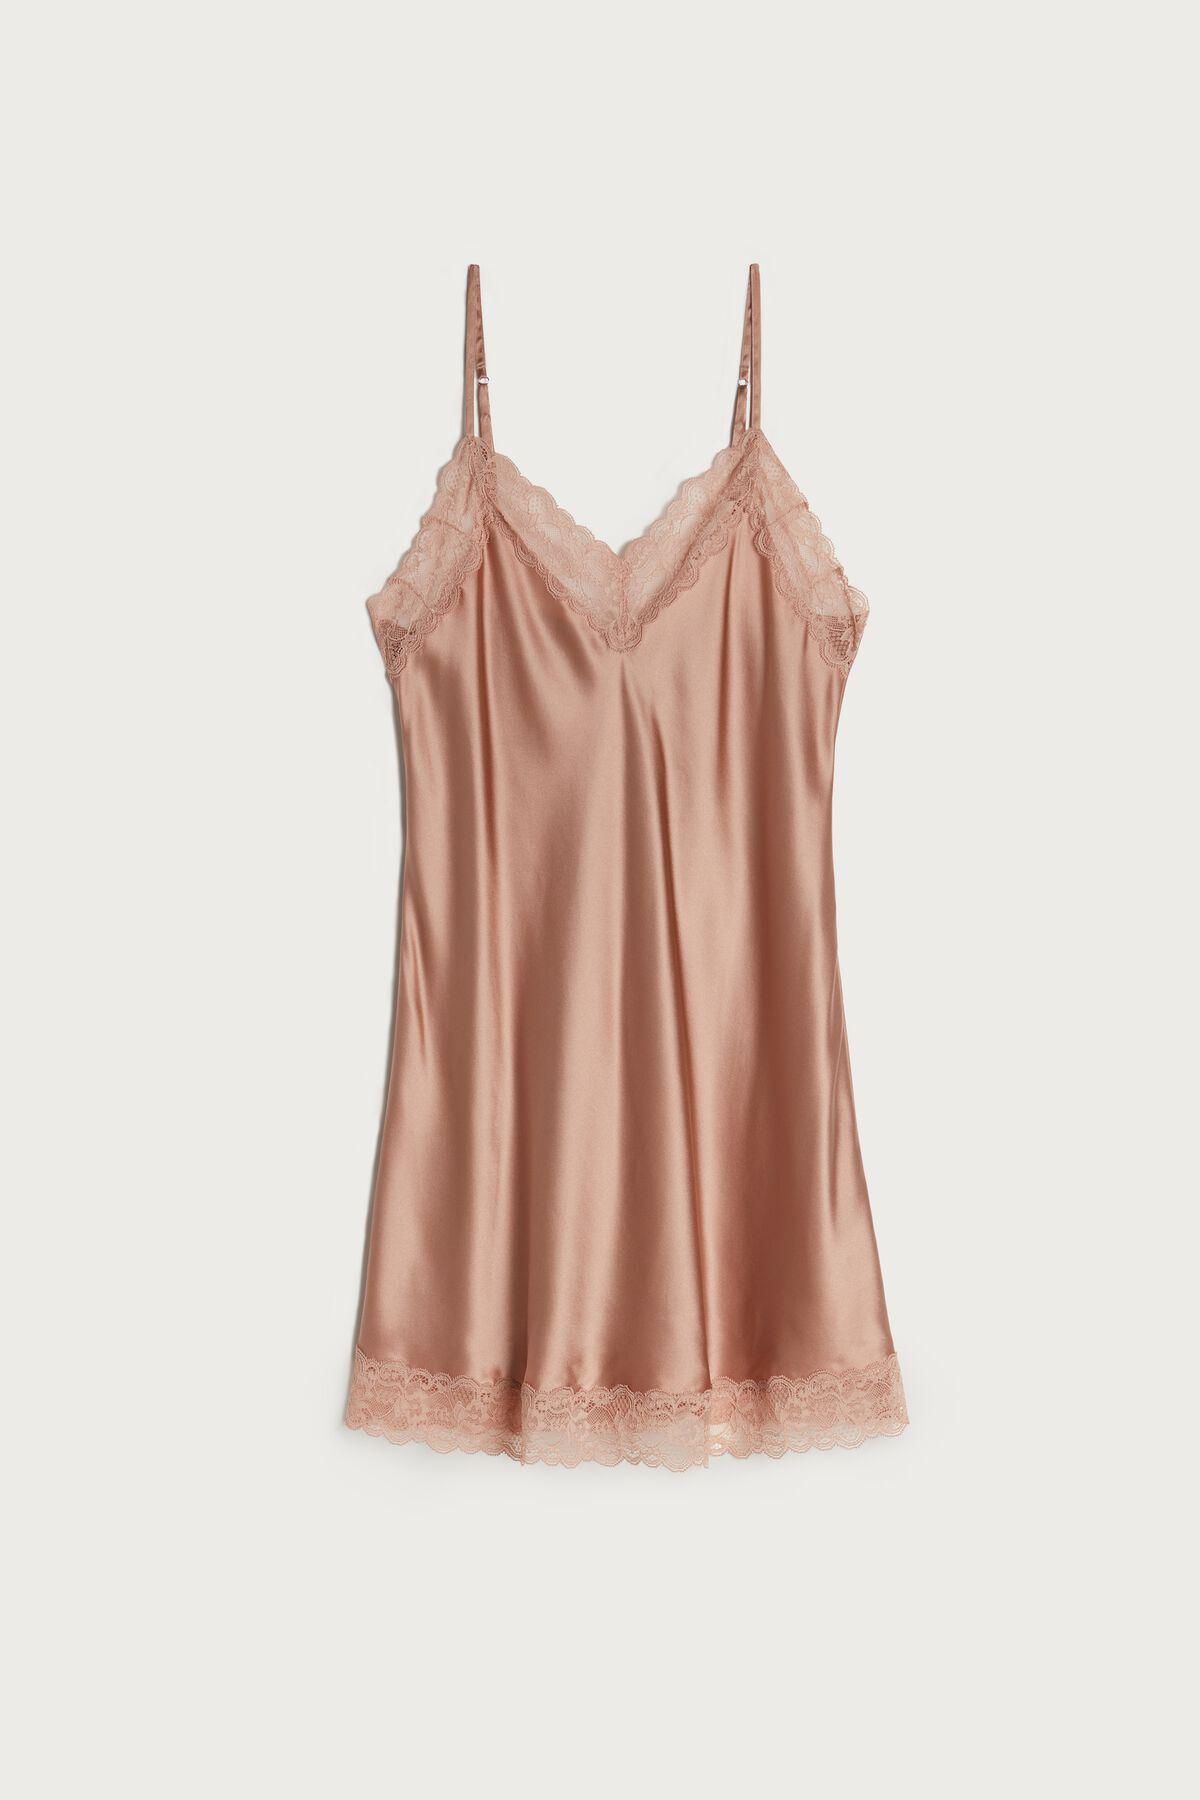 Silk Slip With Lace Insert Detail